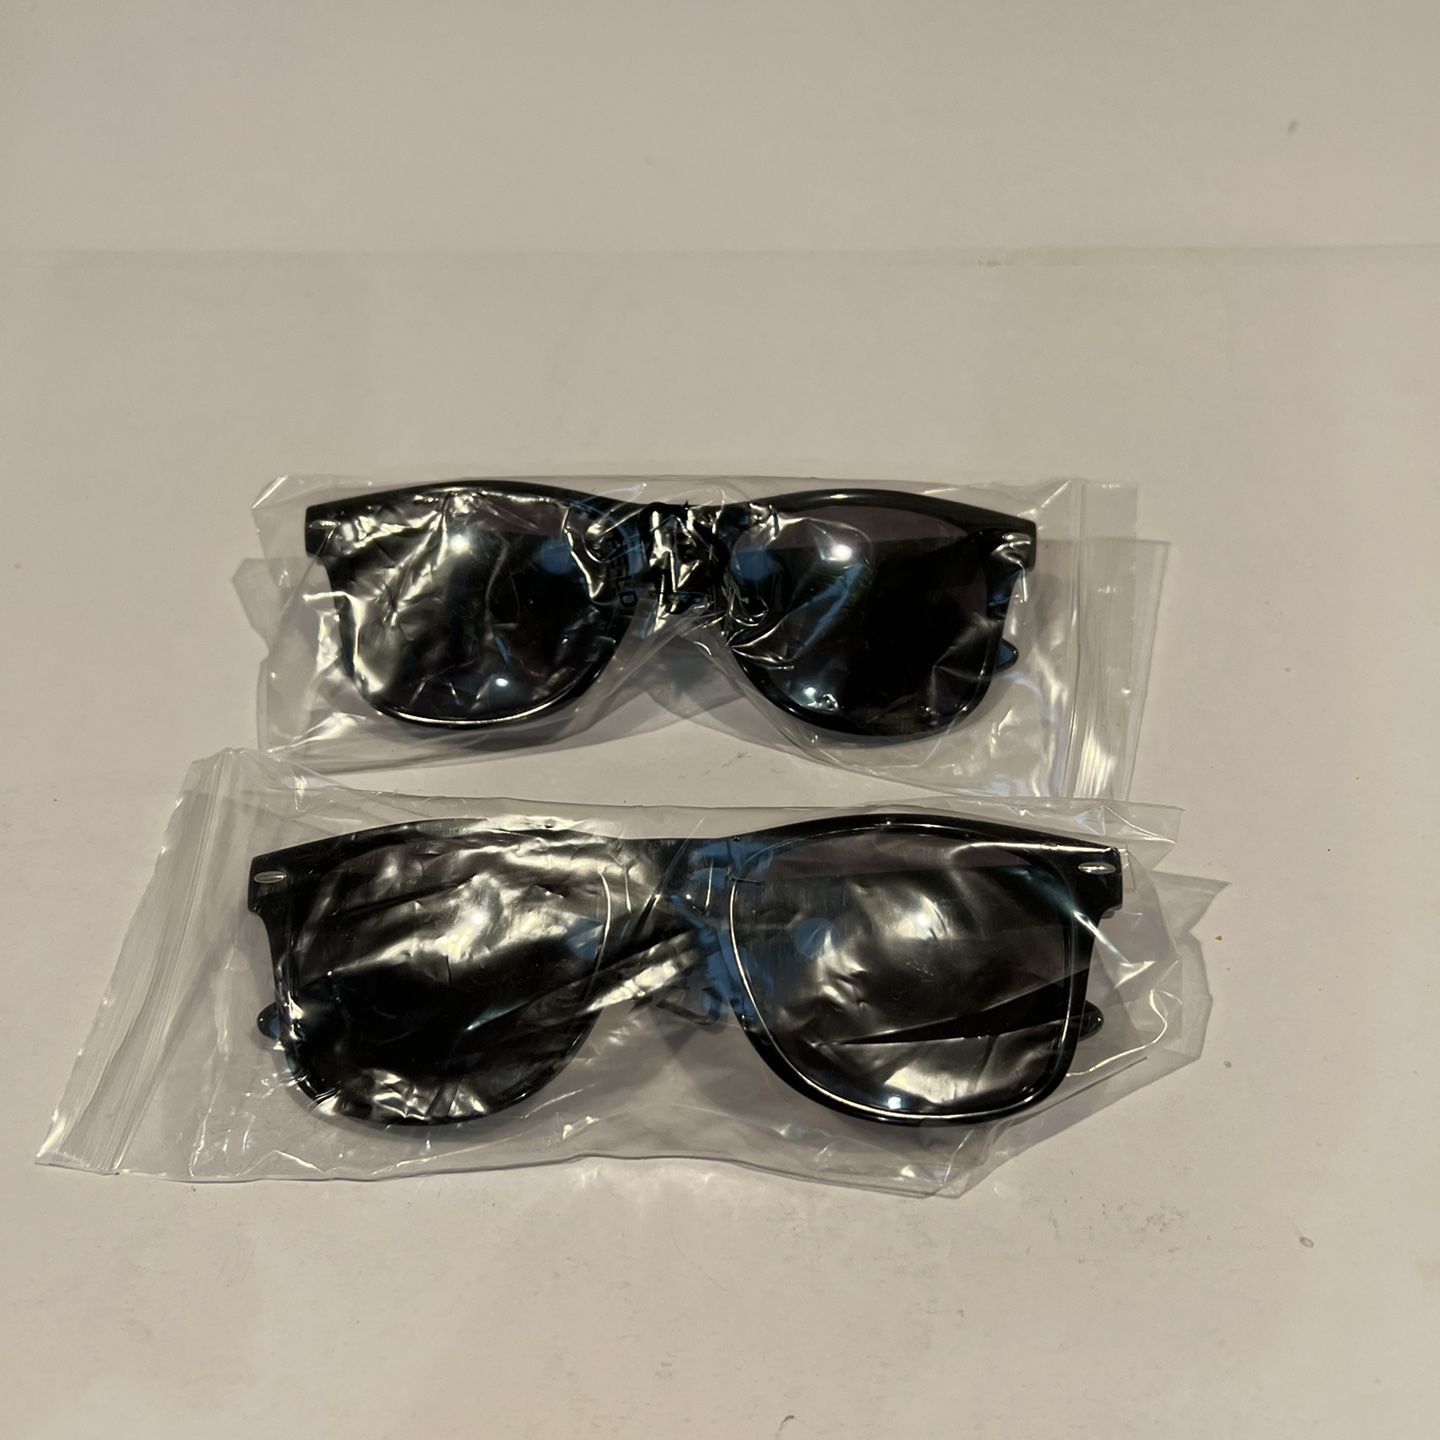 OFF-WHITE Men's Manchester Sunglasses with 3D Effect for Sale in Addison,  TX - OfferUp